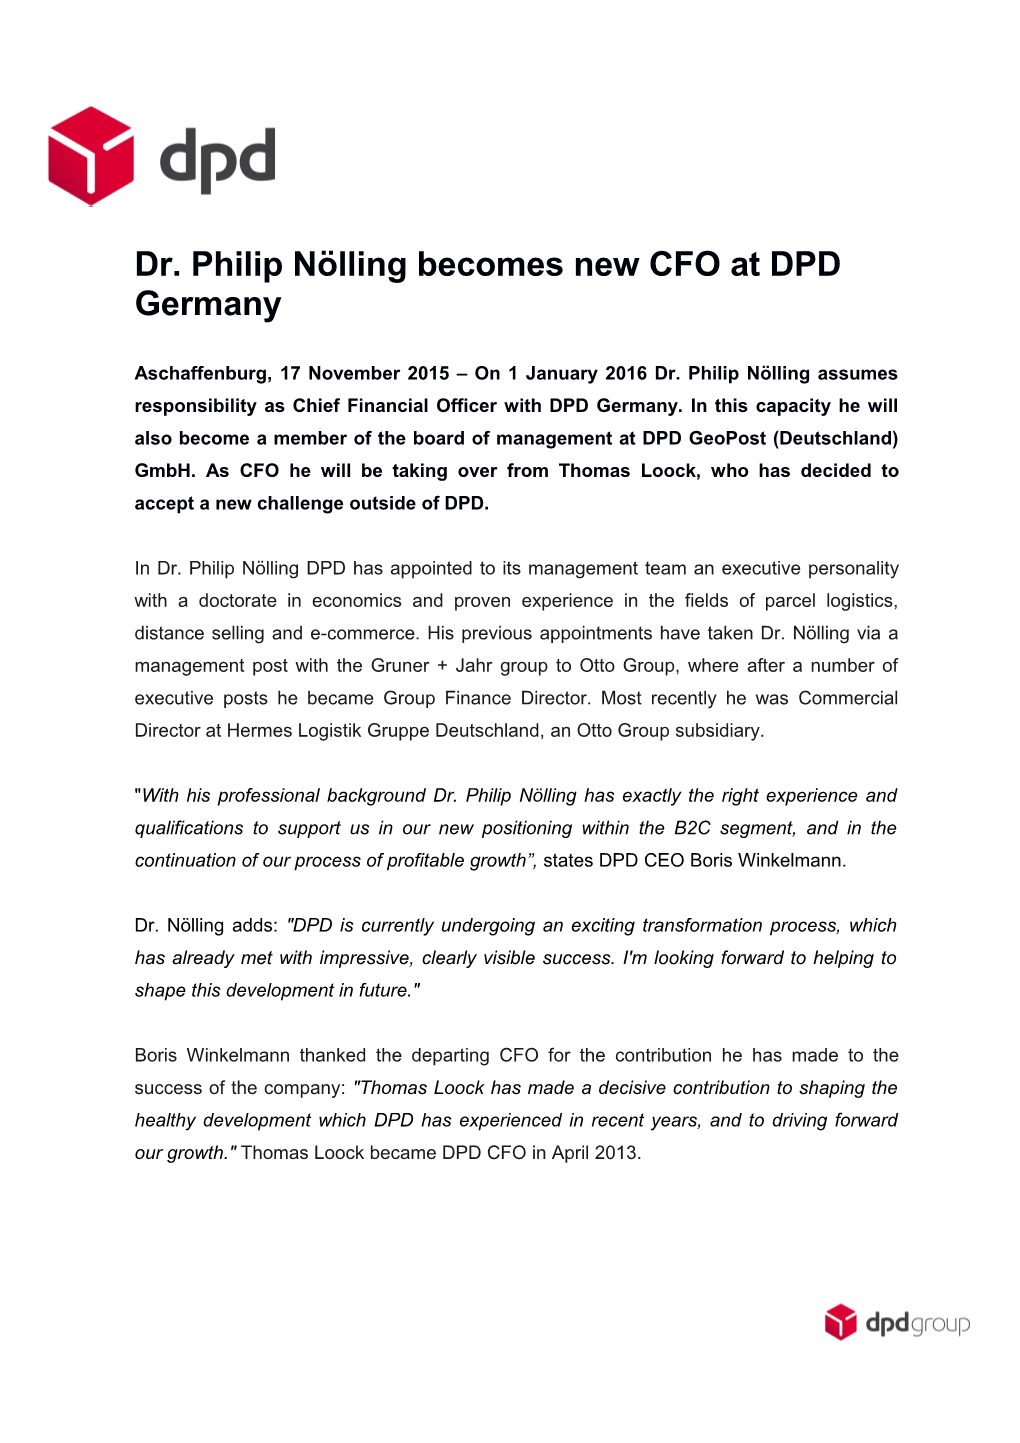 Dr. Philip Nöllingbecomes New CFO at DPD Germany